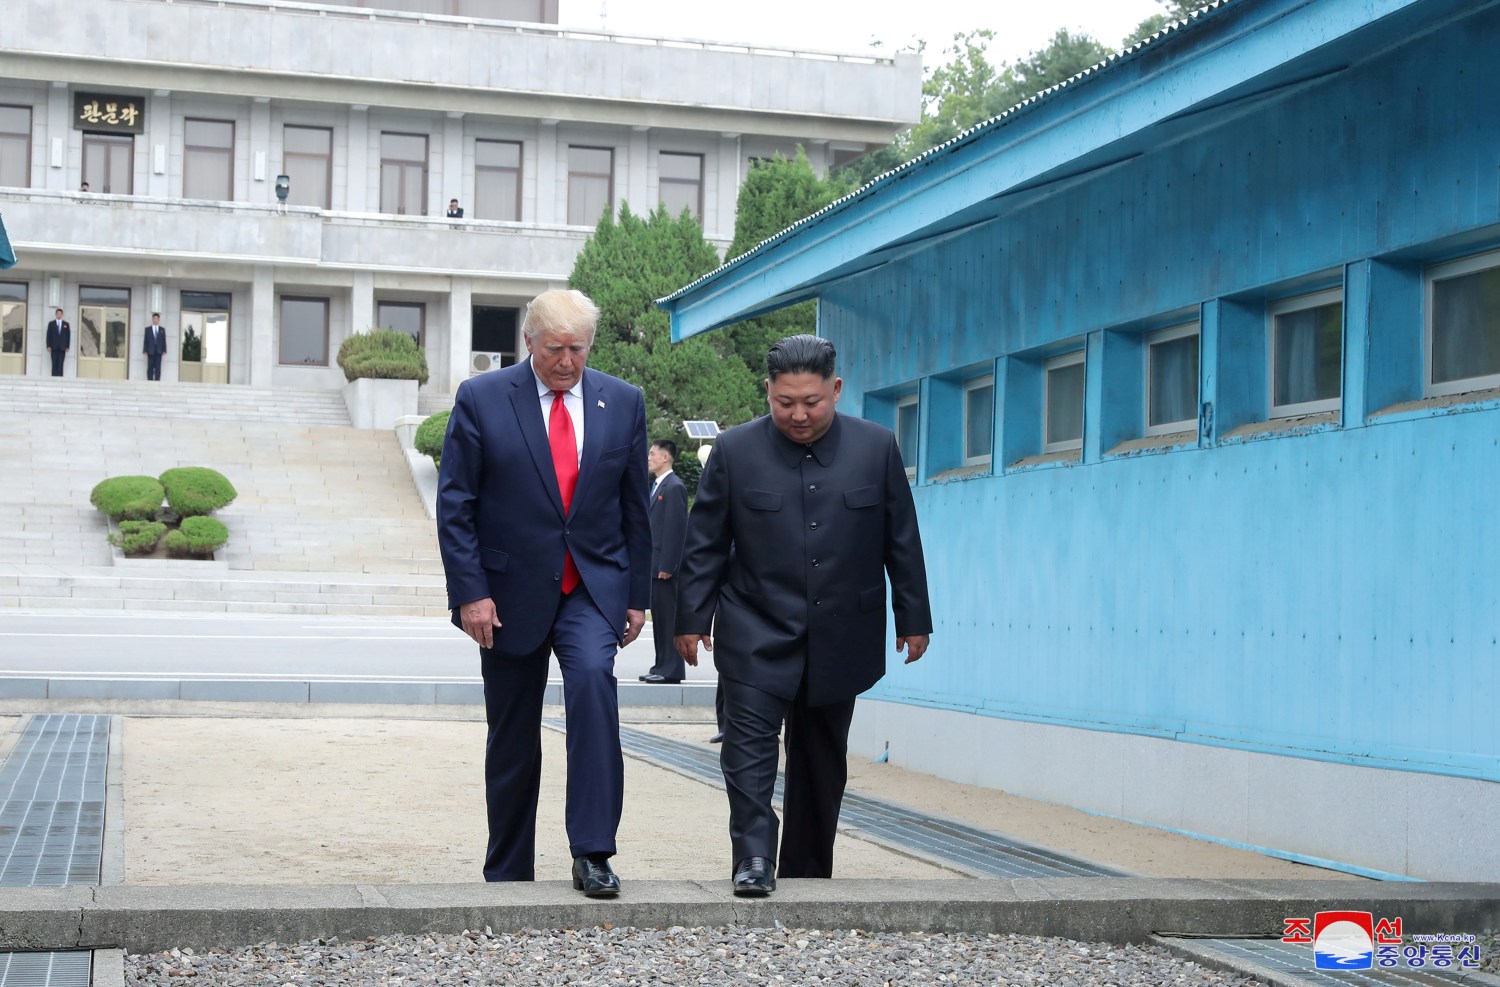 U.S. President Donald Trump and North Korean leader Kim Jong Un cross over a military demarcation line at the demilitarized zone (DMZ) separating the two Koreas, in Panmunjom, South Korea, June 30, 2019. KCNA via REUTERS    ATTENTION EDITORS - THIS IMAGE WAS PROVIDED BY A THIRD PARTY. REUTERS IS UNABLE TO INDEPENDENTLY VERIFY THIS IMAGE. NO THIRD PARTY SALES. SOUTH KOREA OUT. NO COMMERCIAL OR EDITORIAL SALES IN SOUTH KOREA. - RC1D4113FE00